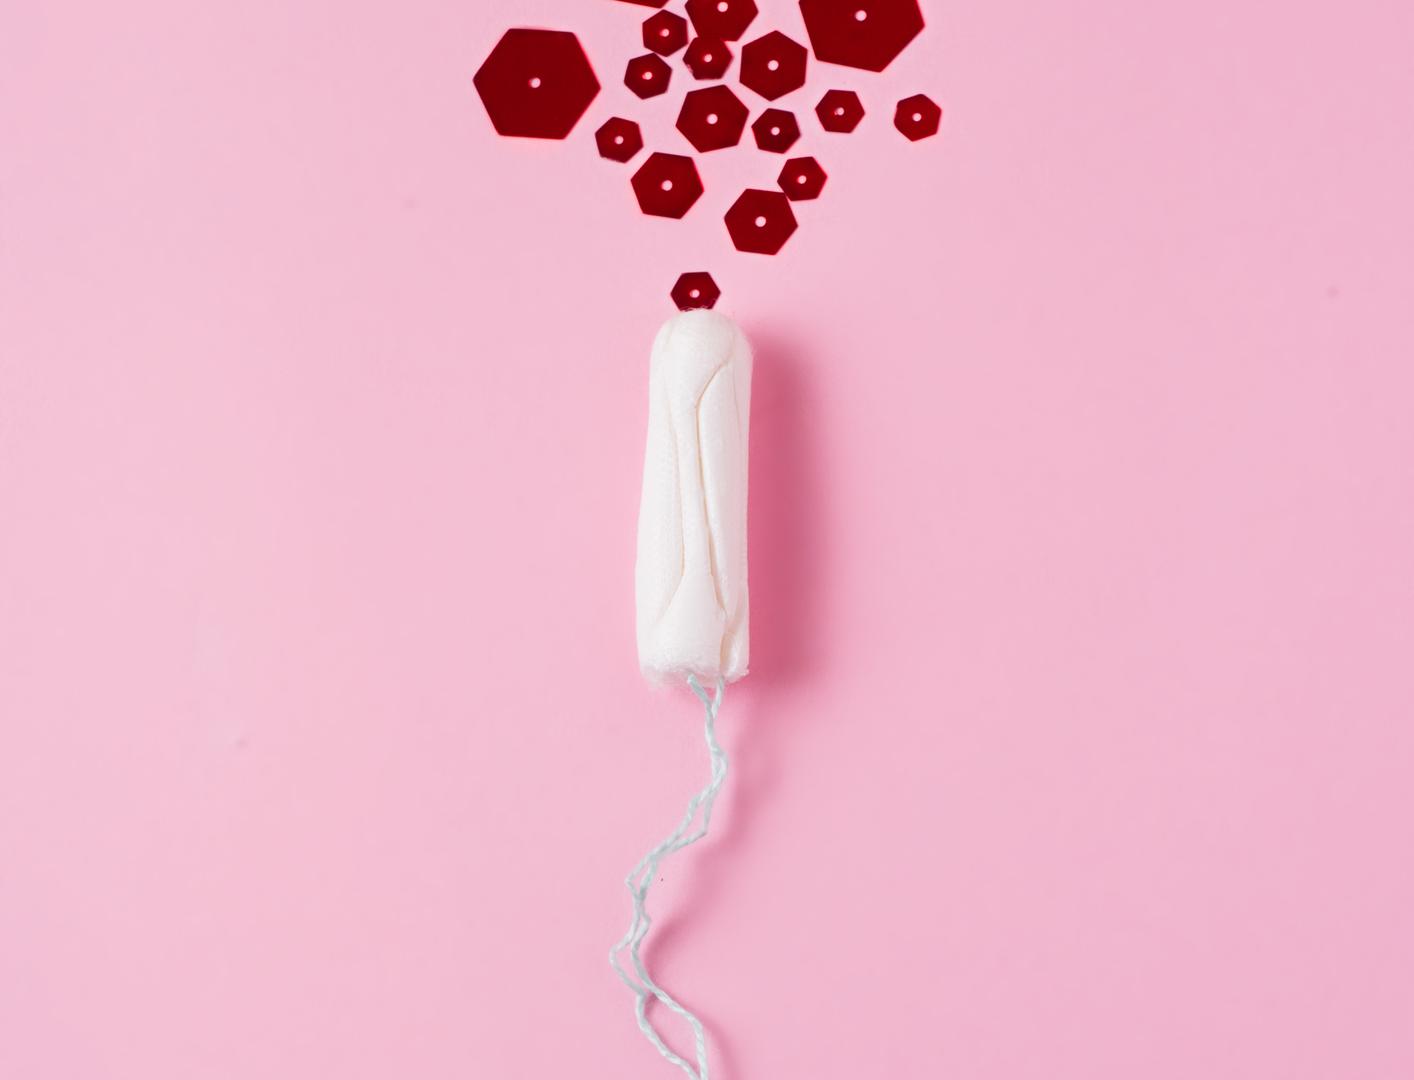 Tampons Periode TSS Zyklus Regelblutung Toxisches Schock Syndrom